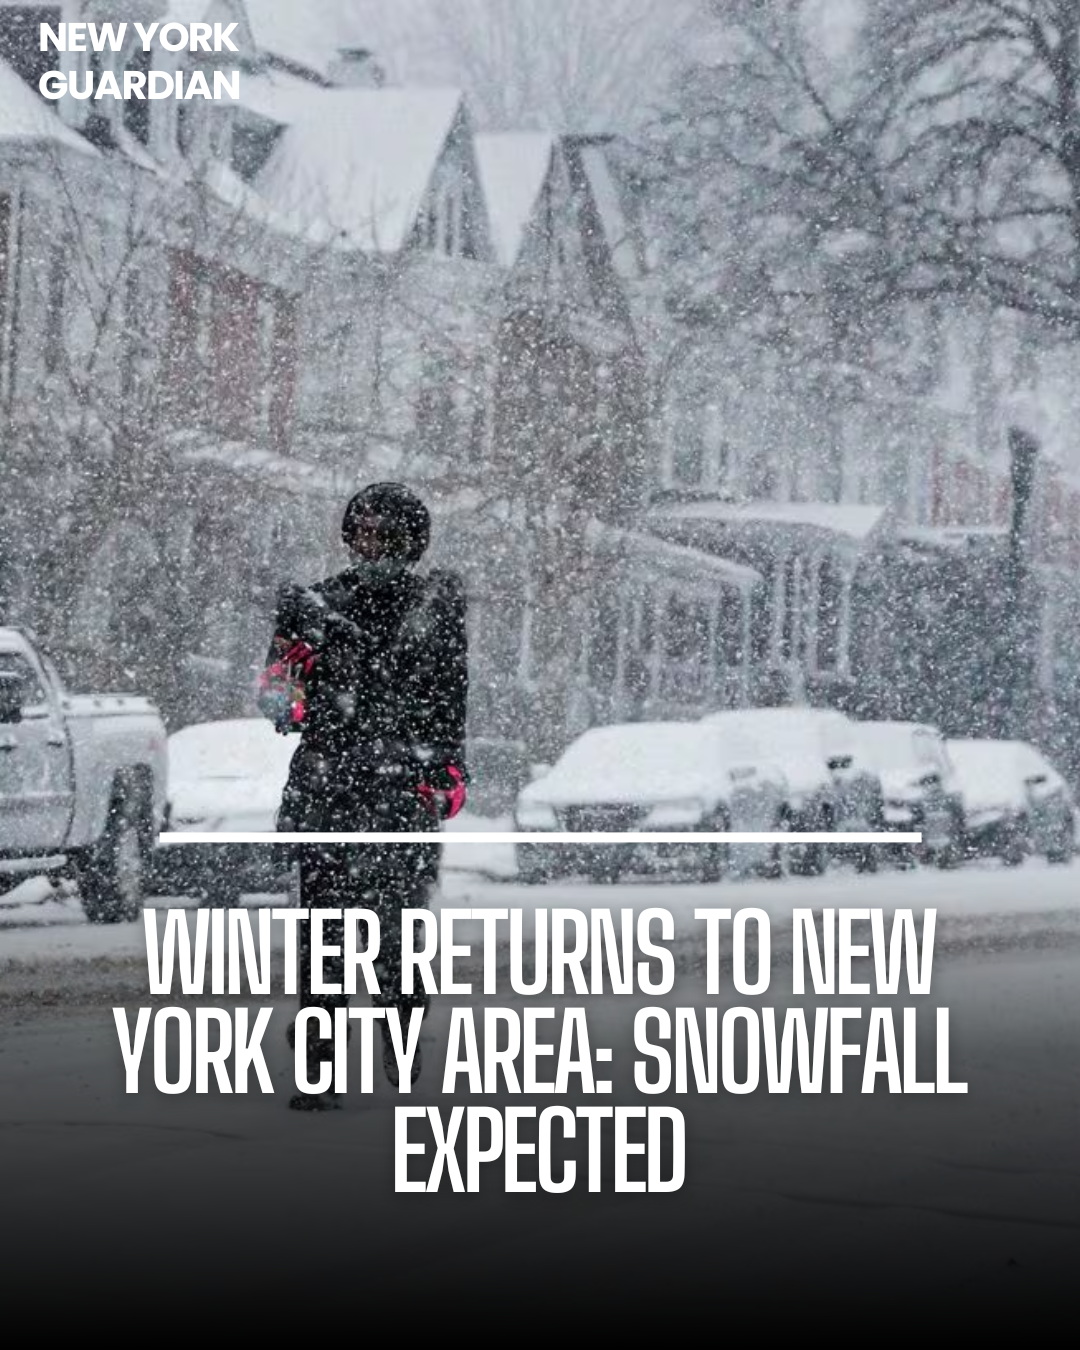 Winter is returning to the New York City area after a long time without heavy snowfall.